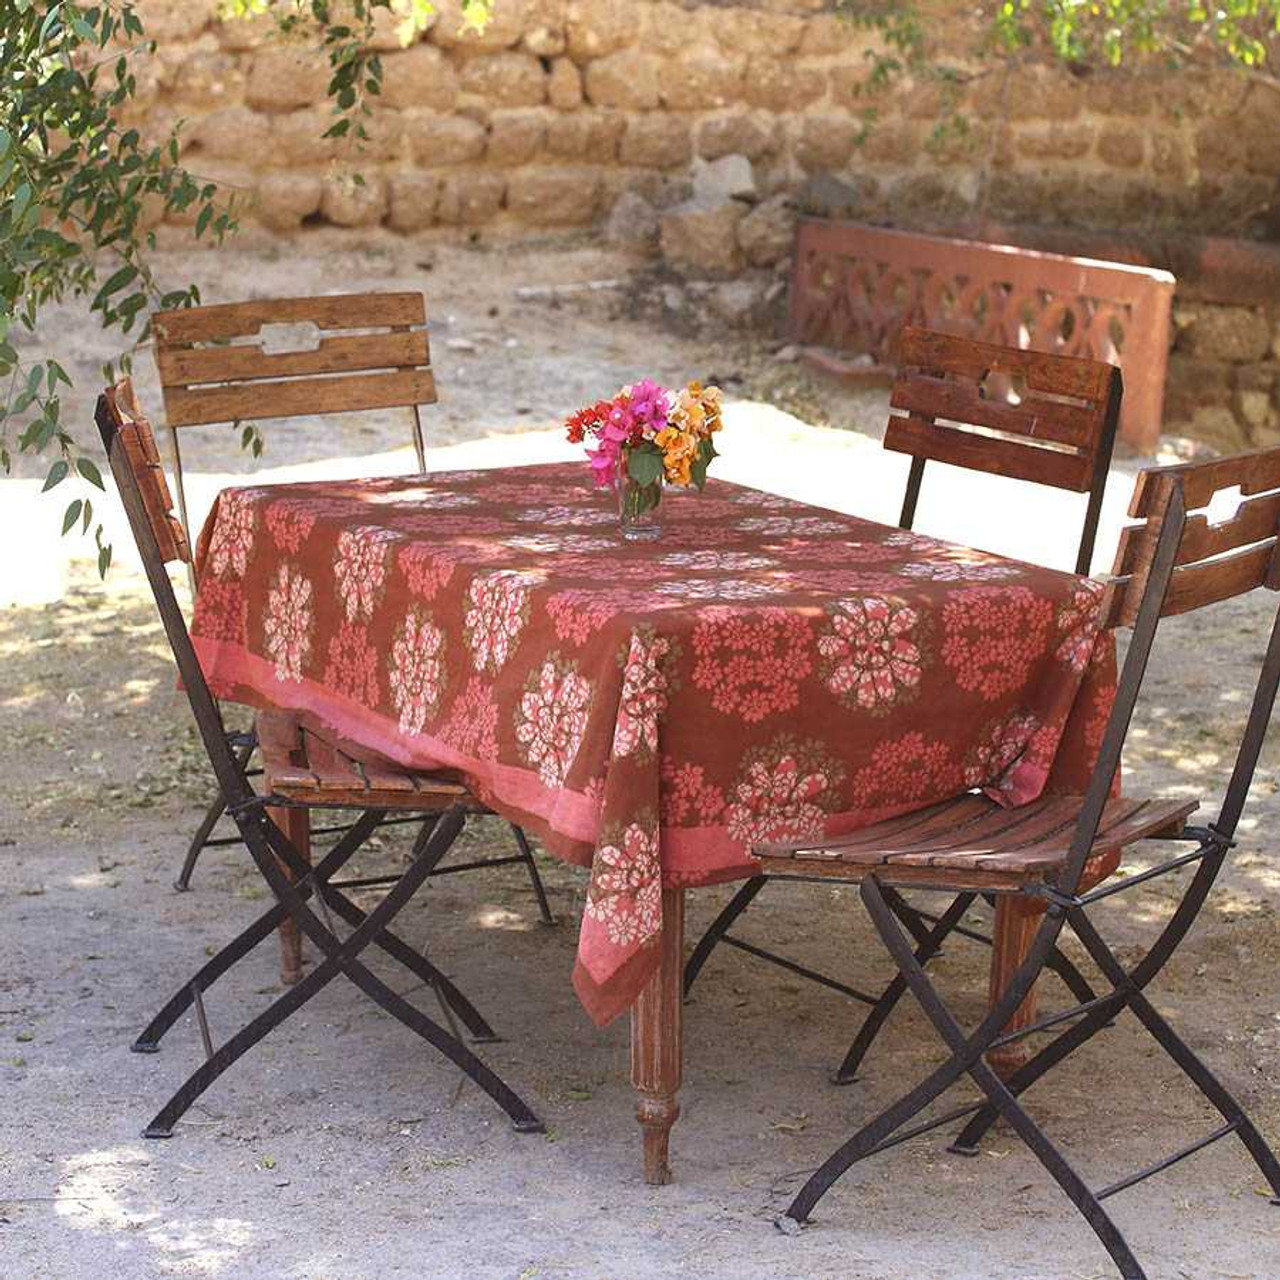 Block Print Collection, Patterned Table Linens